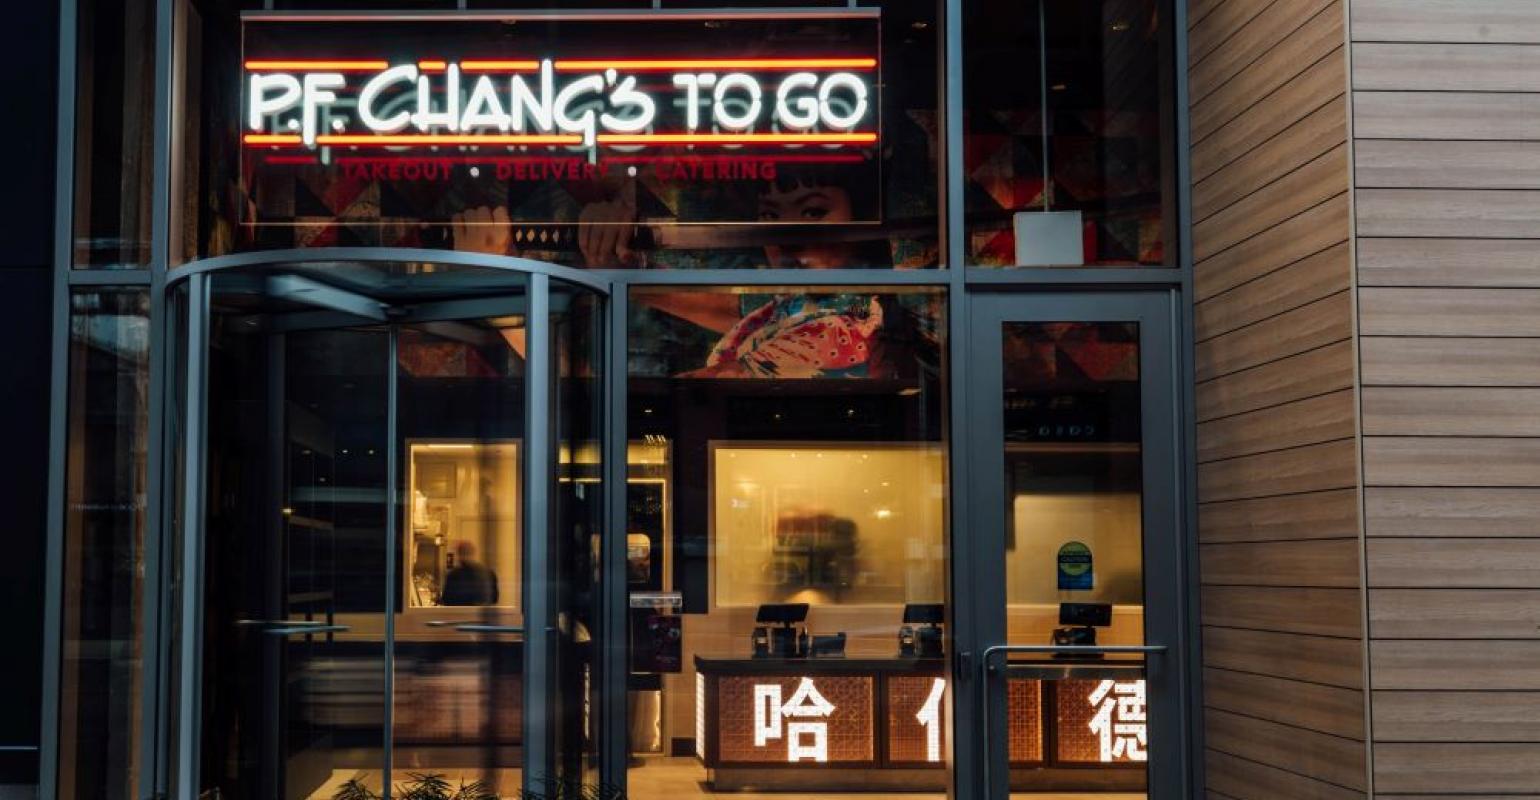 p-f-chang-s-plans-27-p-f-chang-s-to-go-locations-by-2021-nation-s